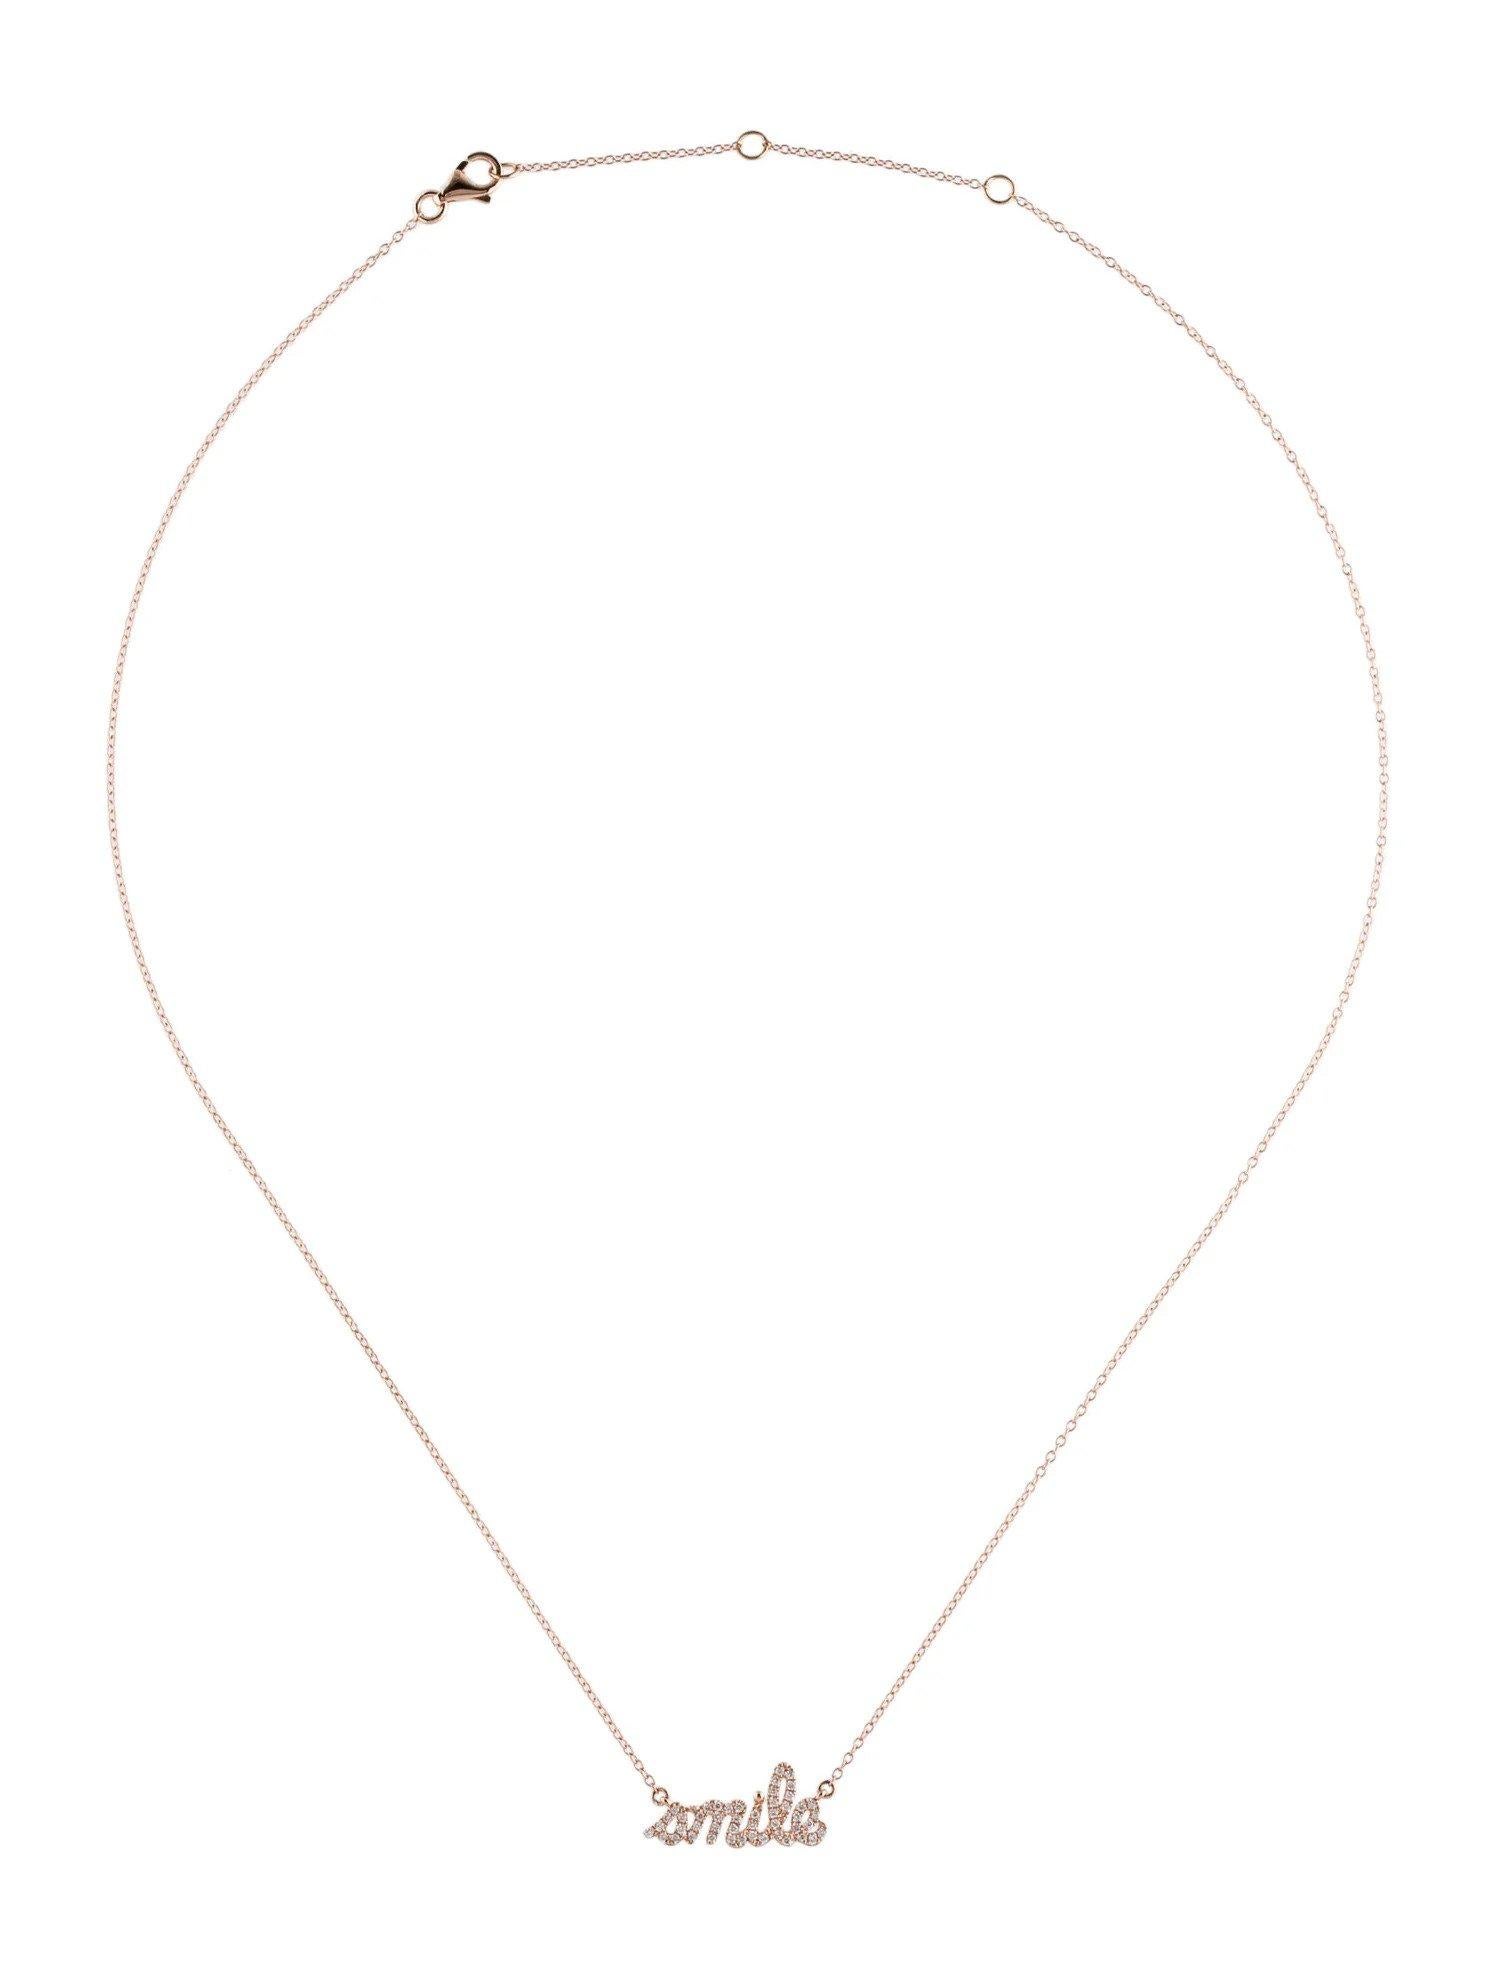 0.14 Carat Diamond Smile Rose Gold Pendant Necklace In New Condition For Sale In Great Neck, NY